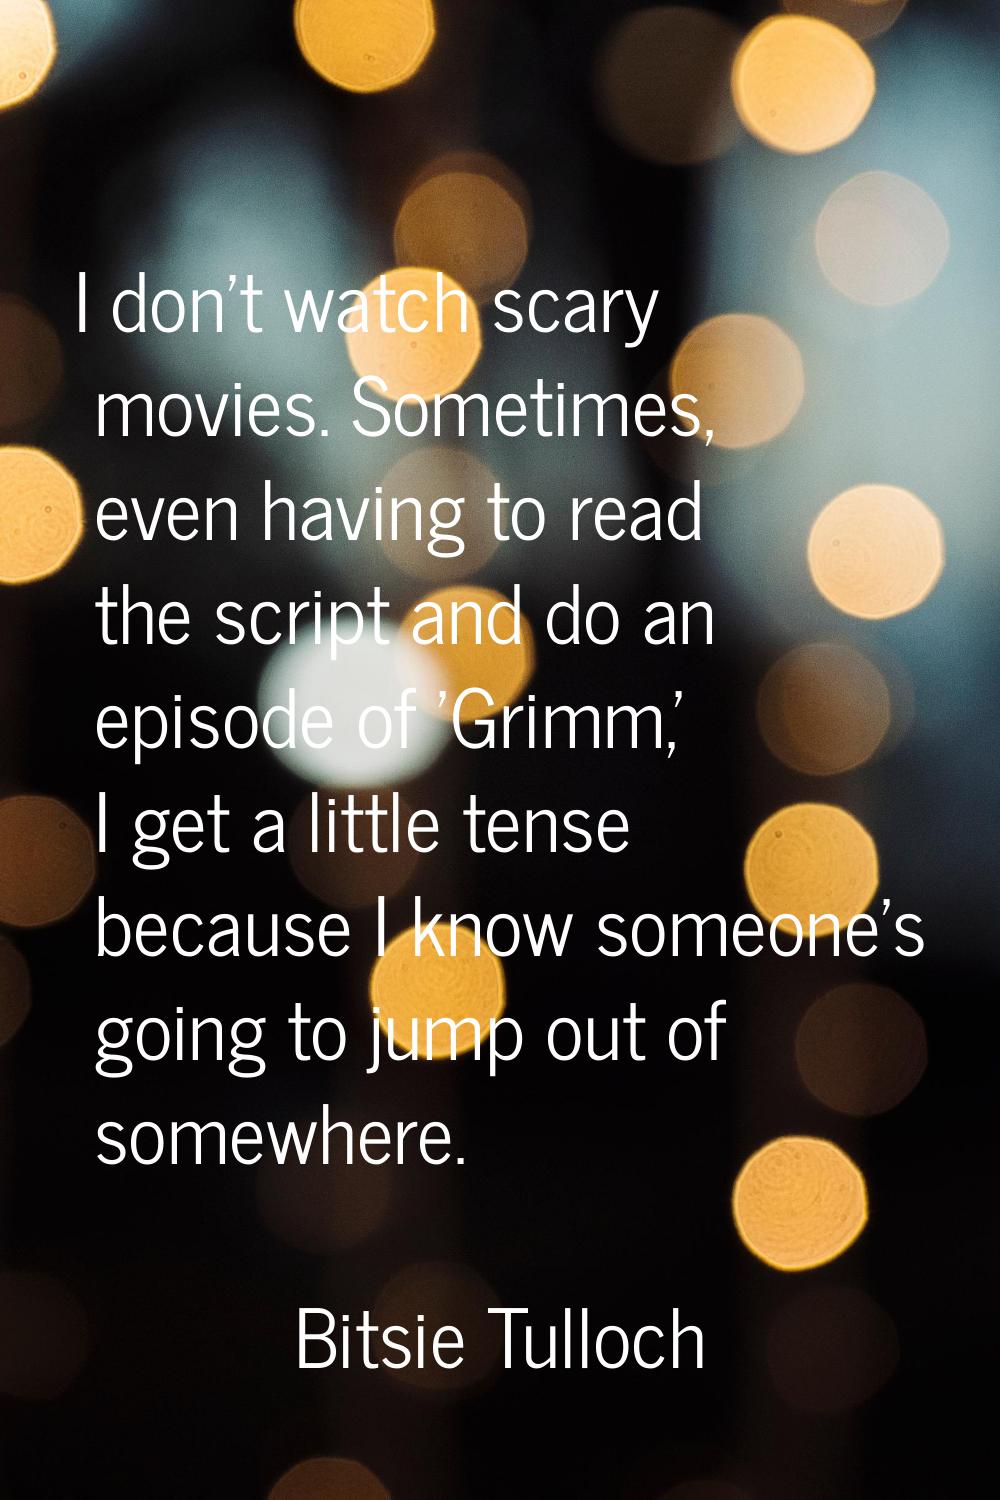 I don't watch scary movies. Sometimes, even having to read the script and do an episode of 'Grimm,'